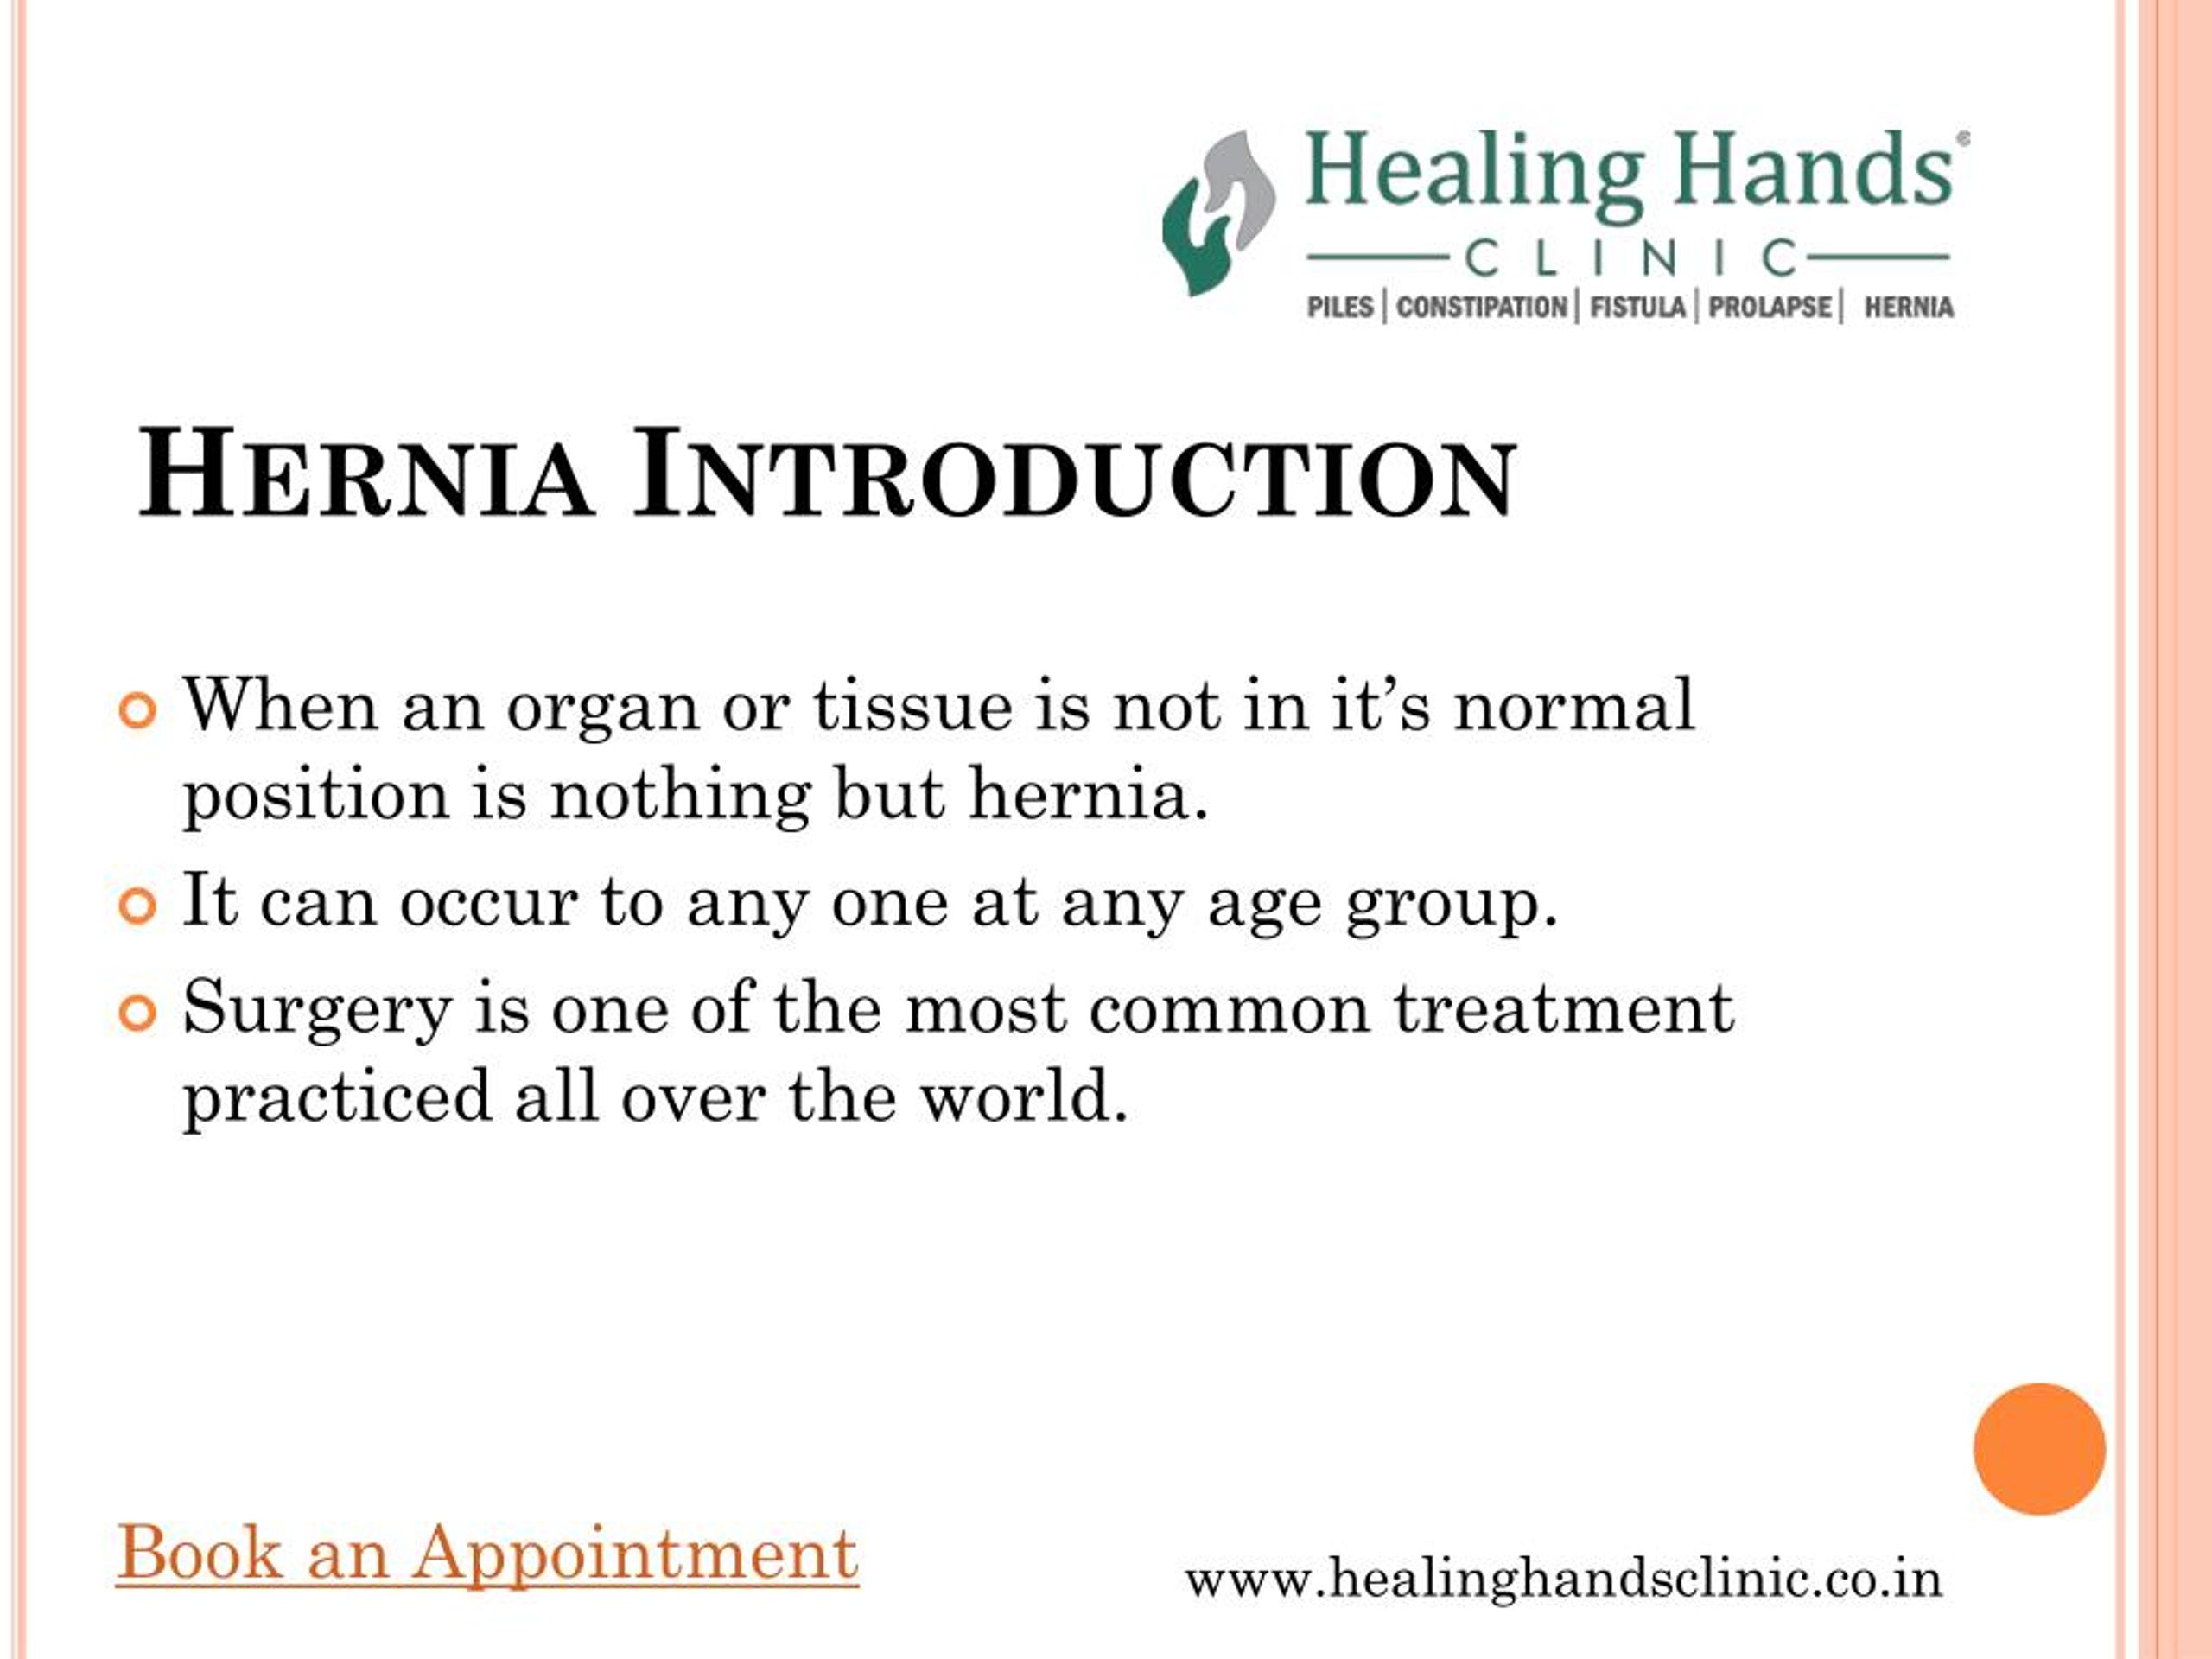 Hernia: Causes, Symptoms, and Treatment